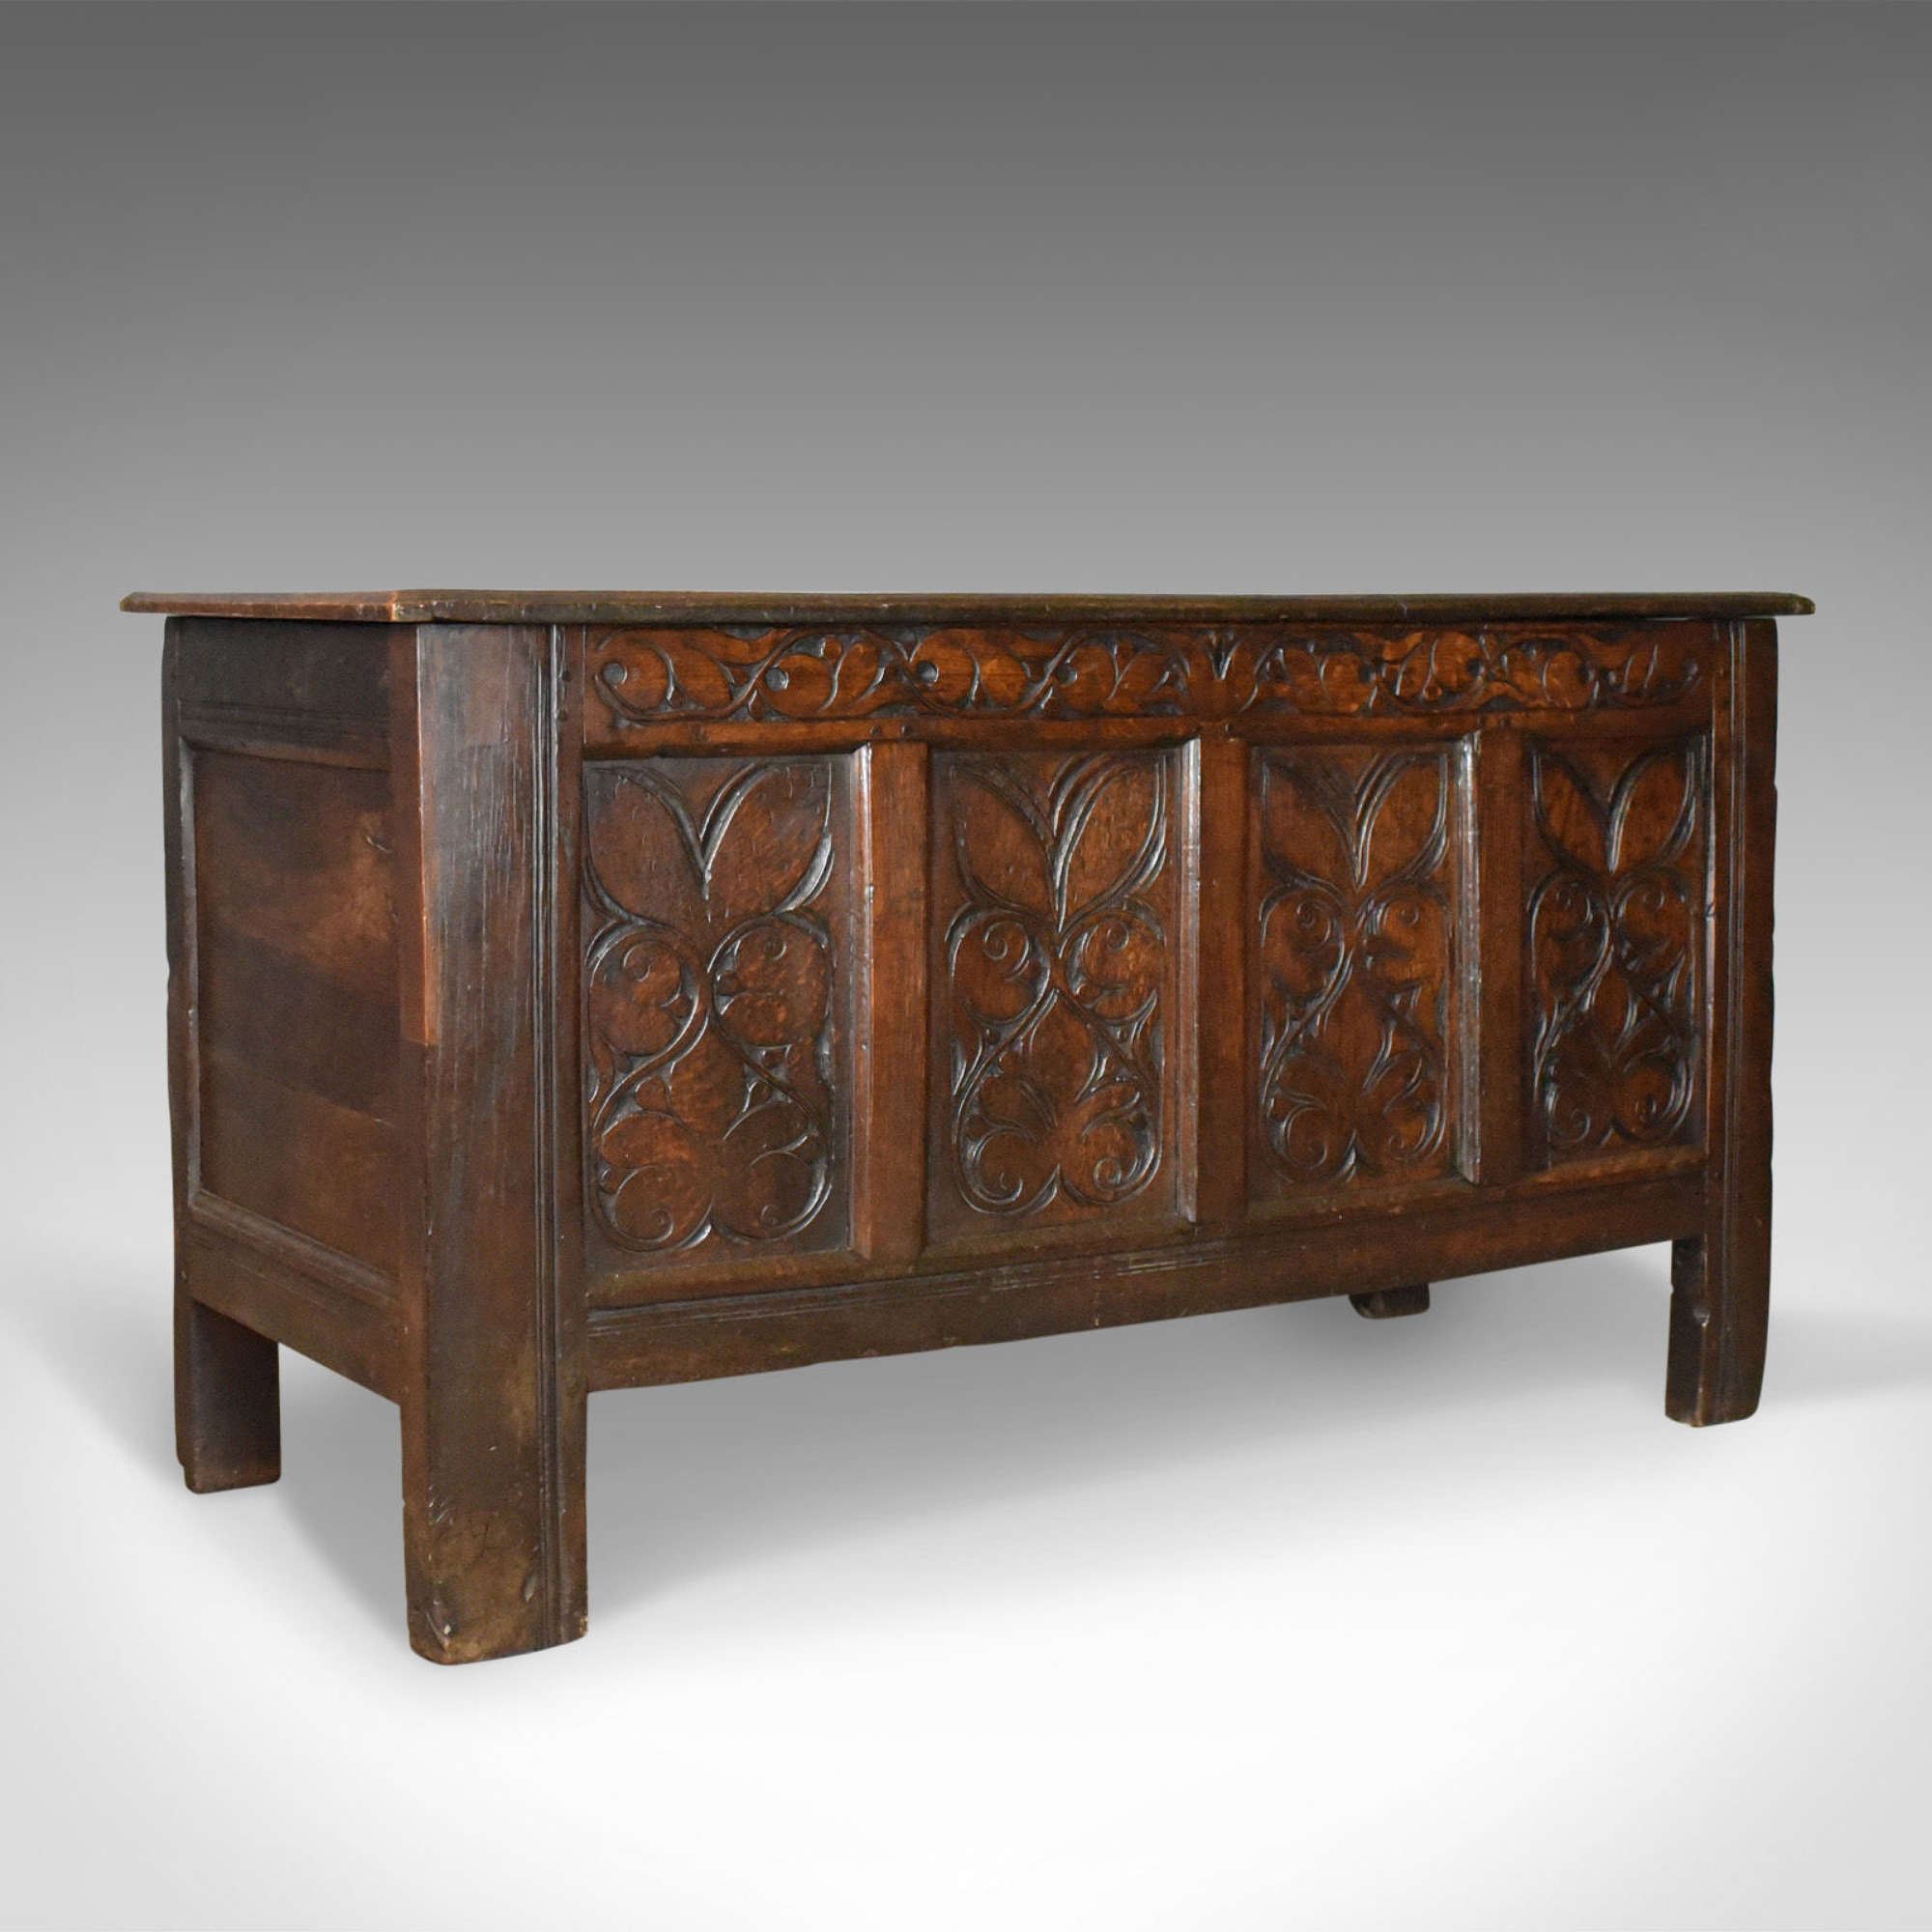 Antique Coffer, Large, English Oak Chest, Early 18th Century Trunk C.1700